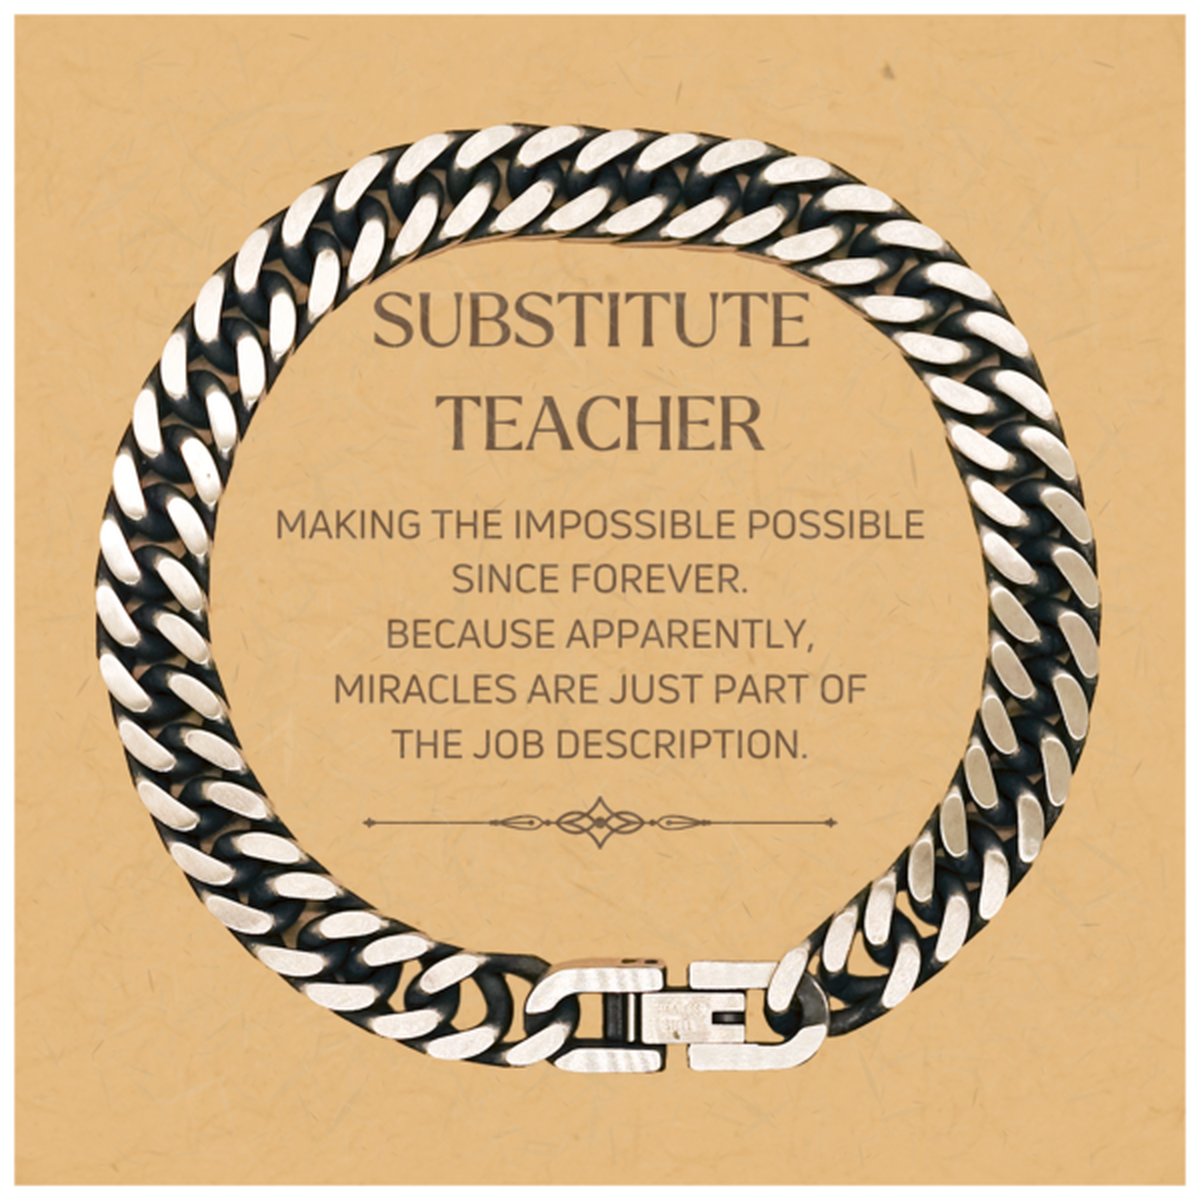 Funny Substitute Teacher Gifts, Miracles are just part of the job description, Inspirational Birthday Christmas Cuban Link Chain Bracelet For Substitute Teacher, Men, Women, Coworkers, Friends, Boss